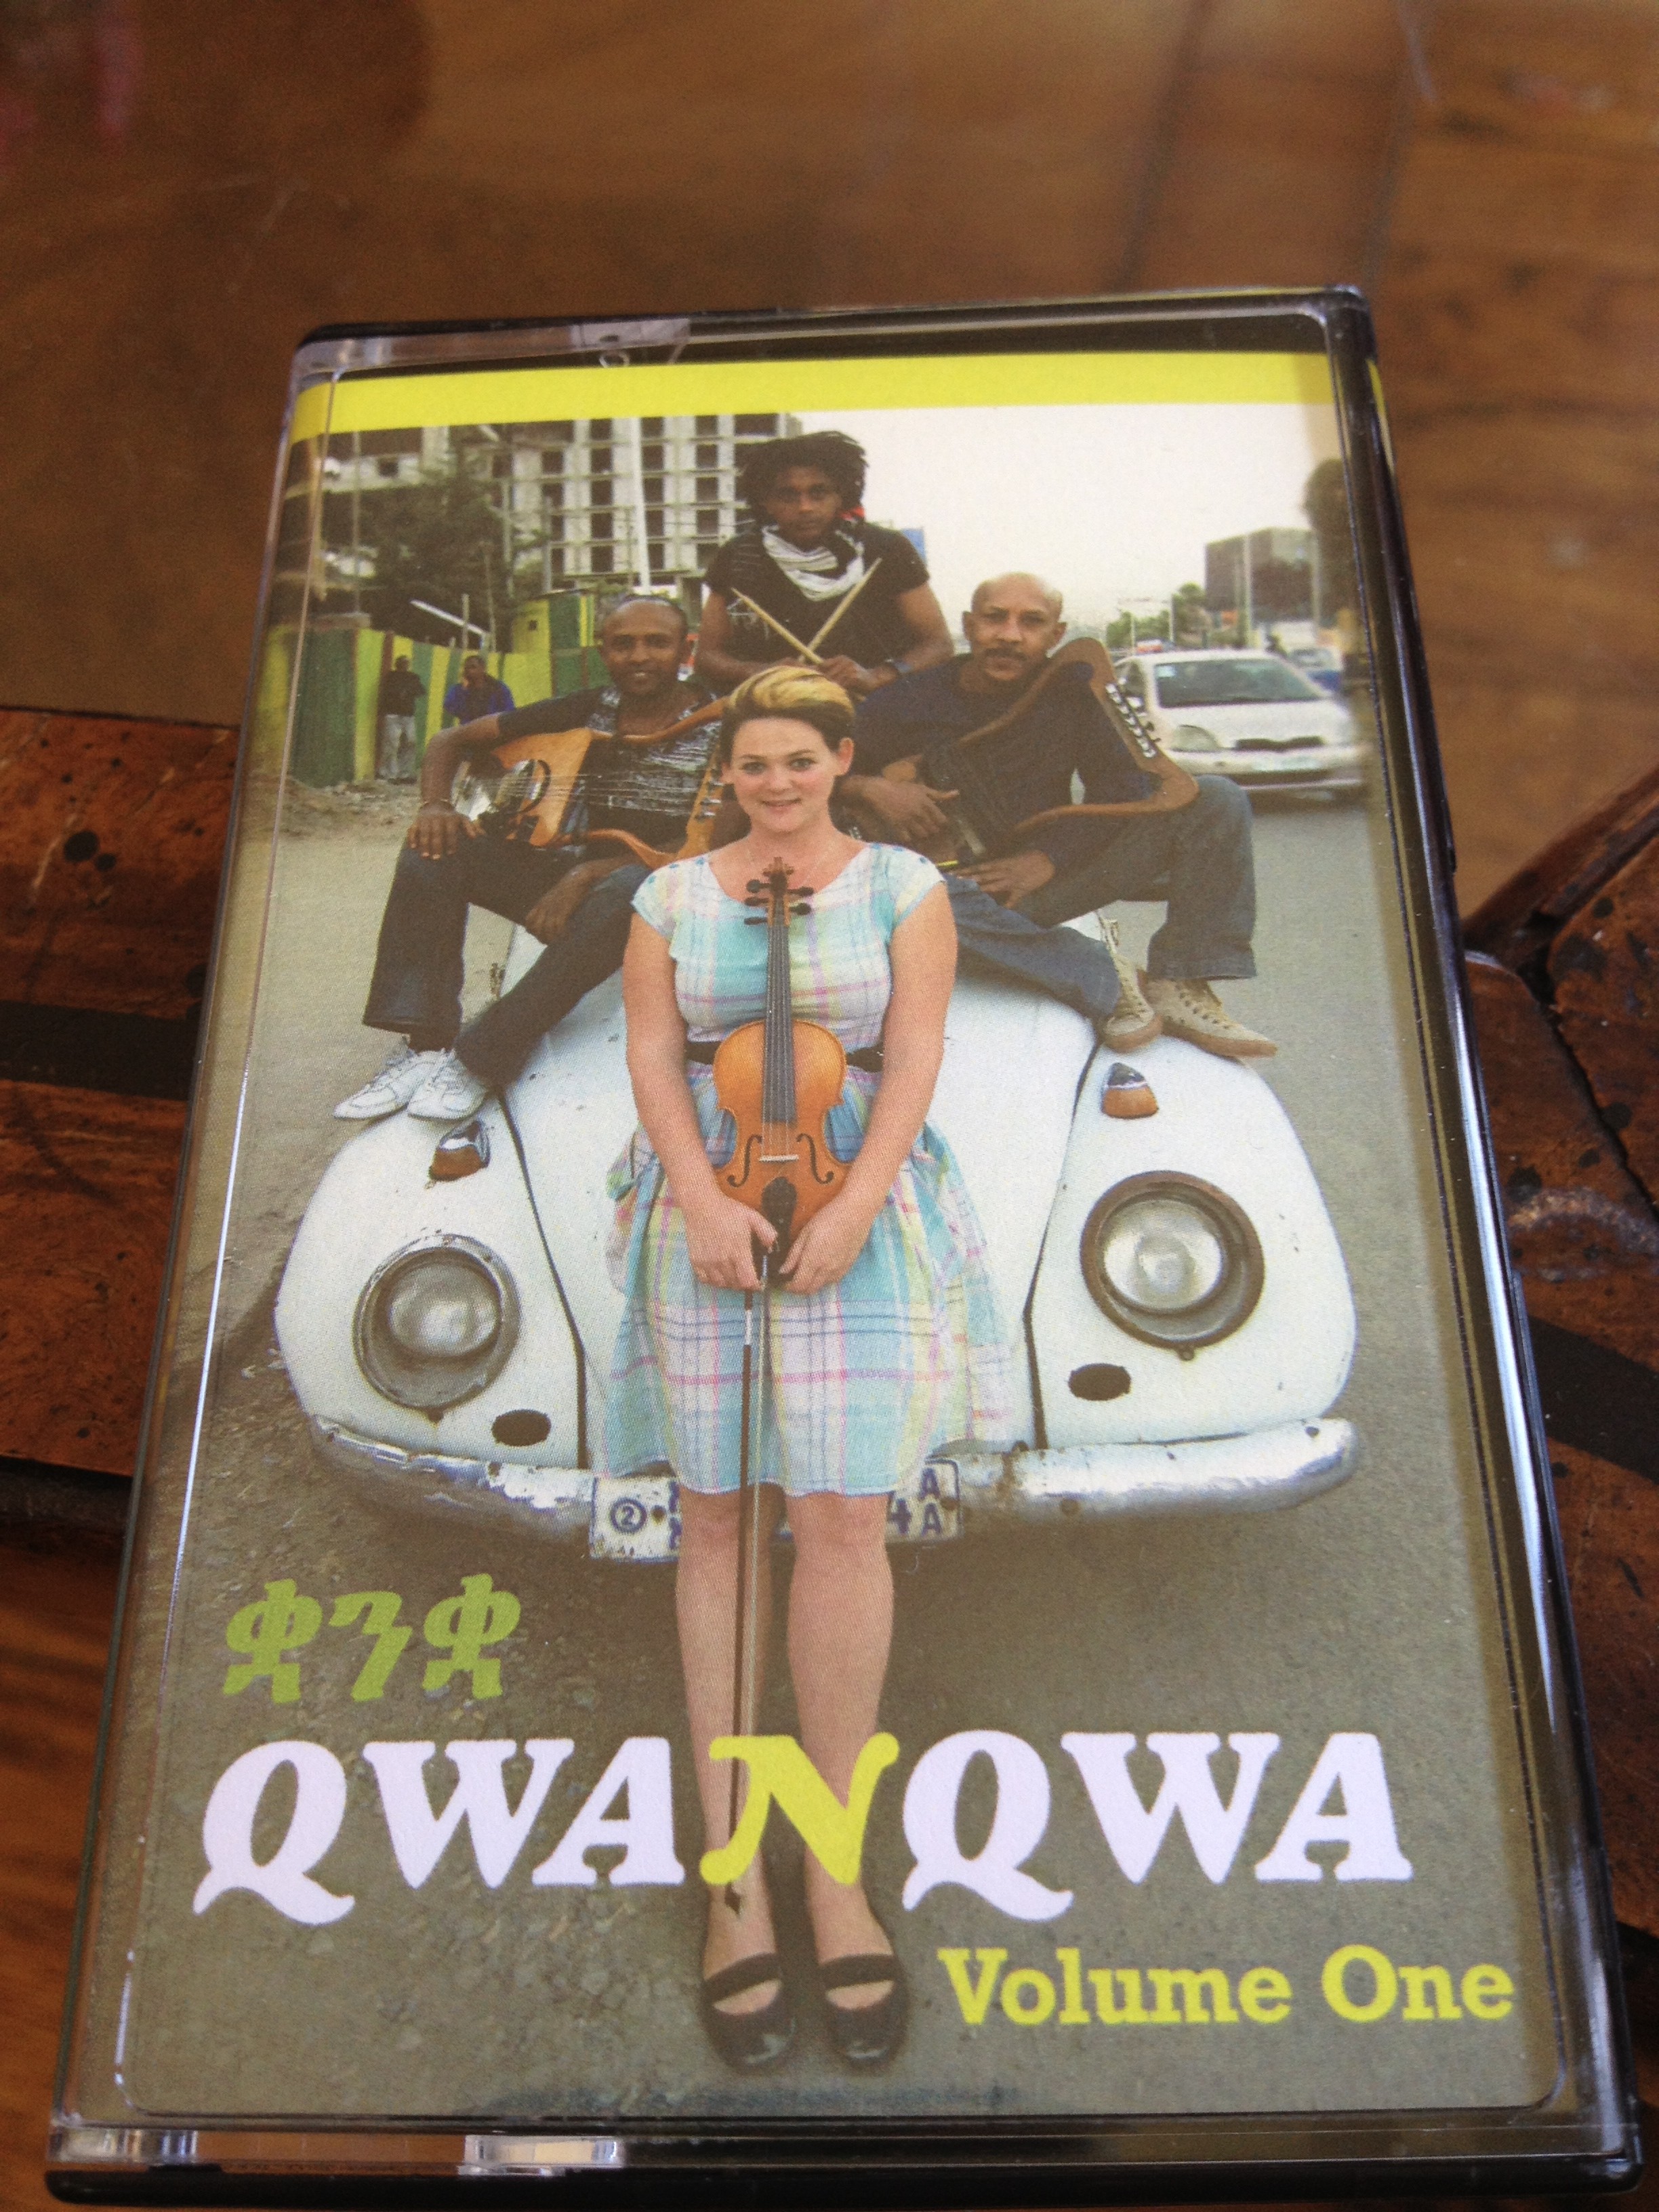 A Qwanqwa tape, photographed in Pakulski's living room.